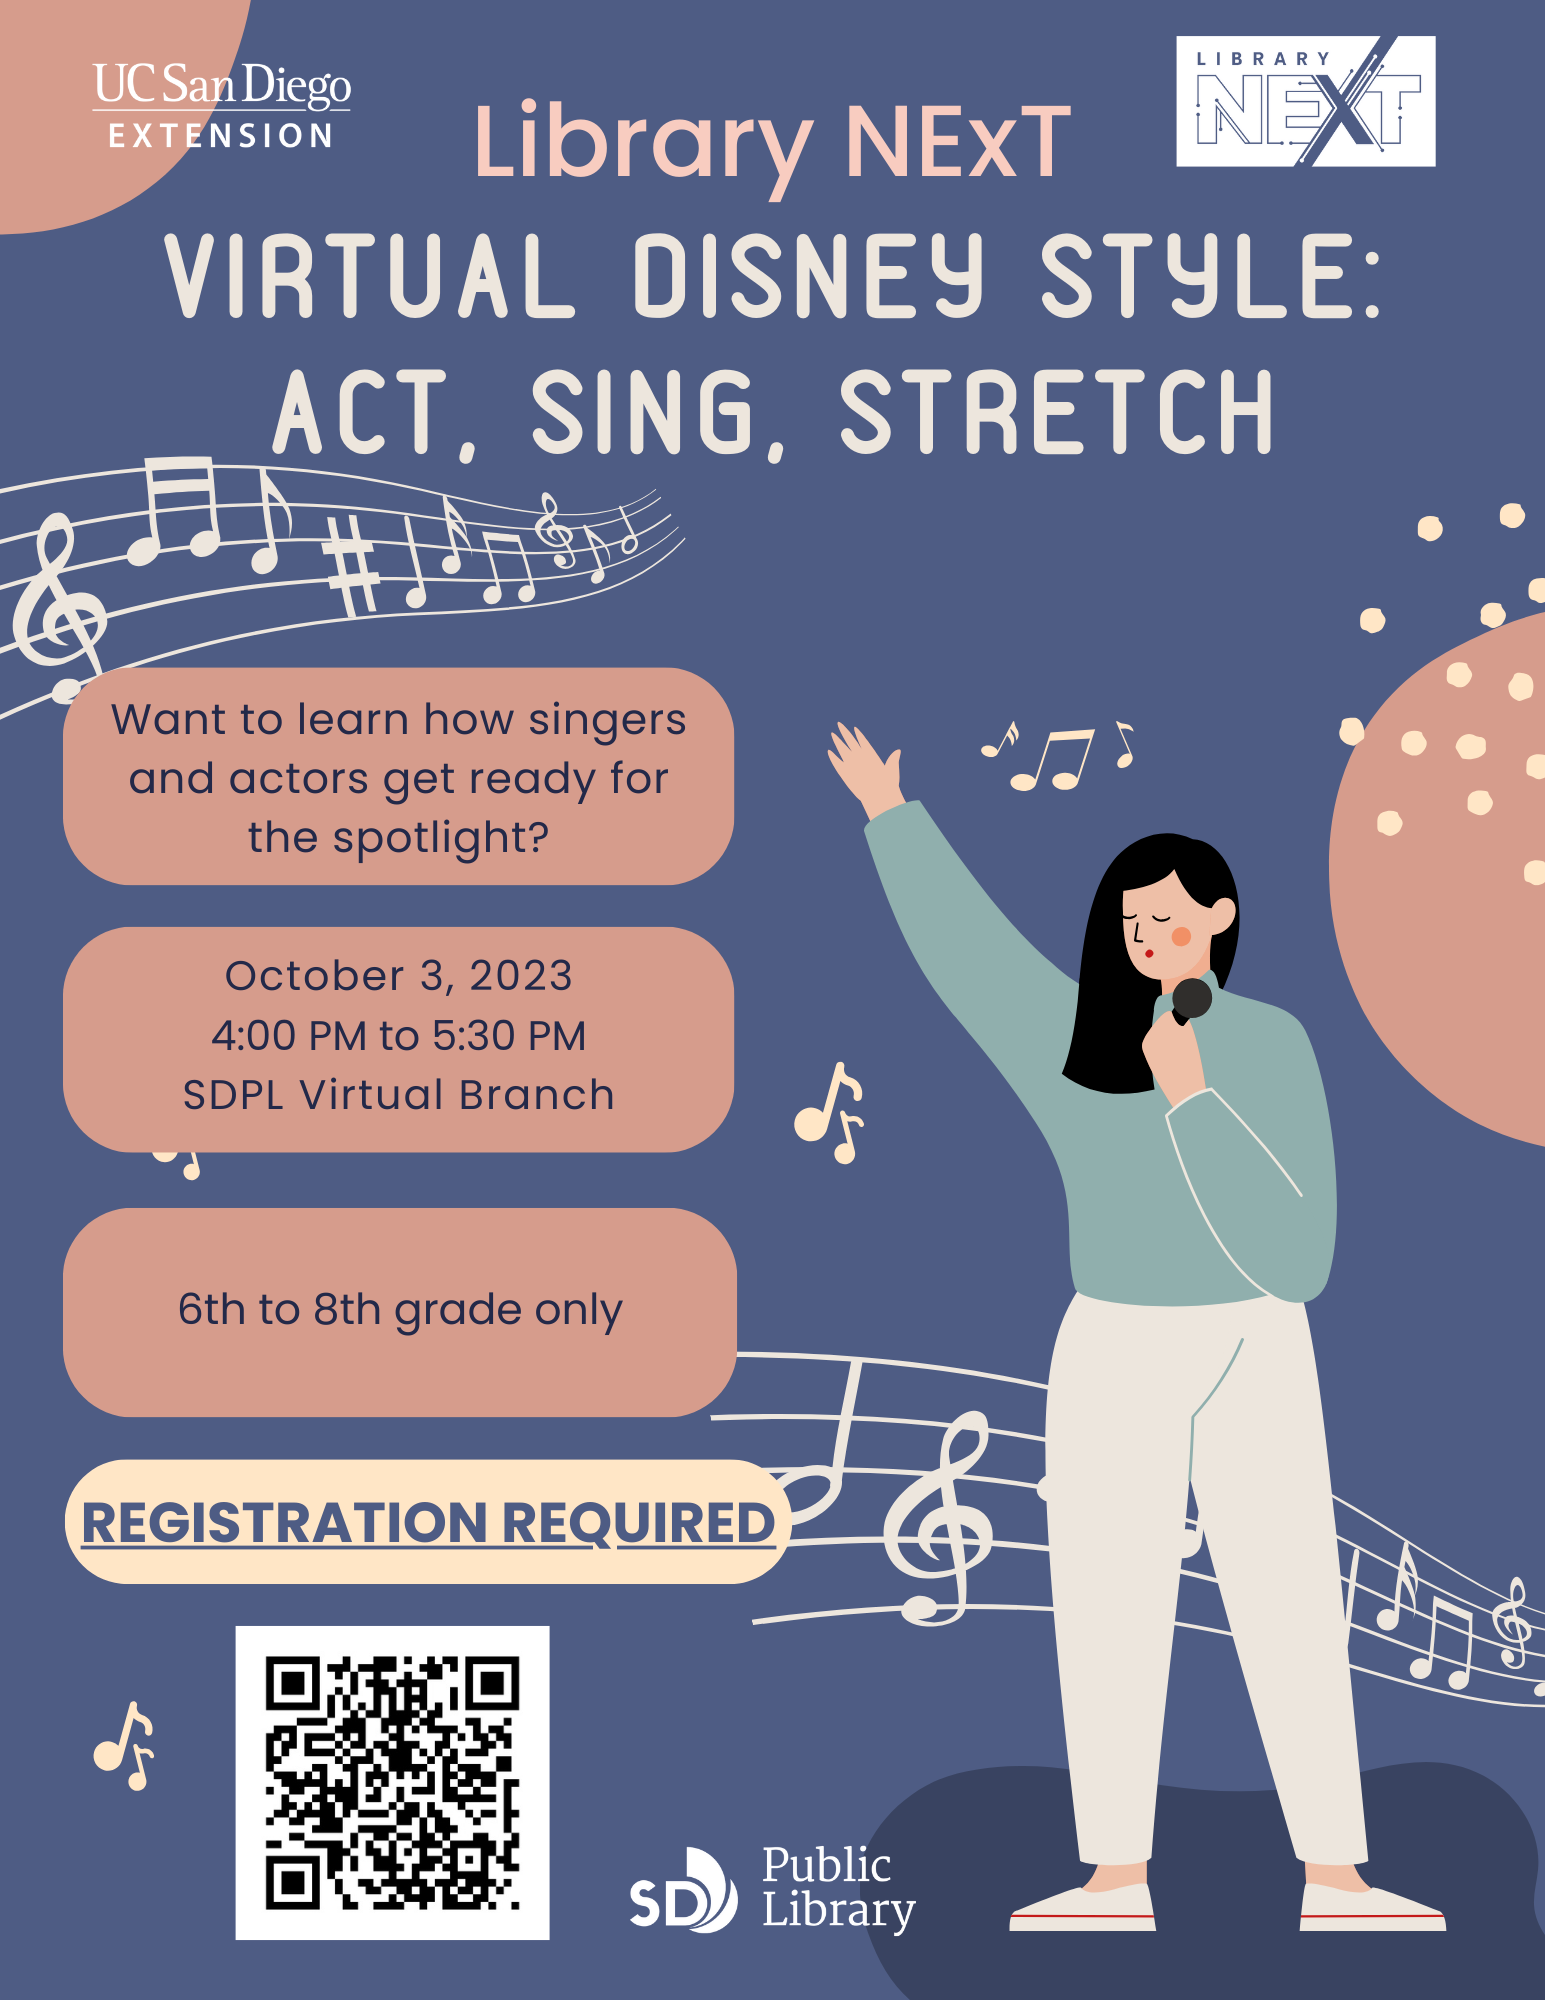 Want to learn how singers and actors get ready for the spotlight? October 3, 2023. 4-5 PM. SDPL Virtual Branch. 6th to 8th grade only. Registration required.